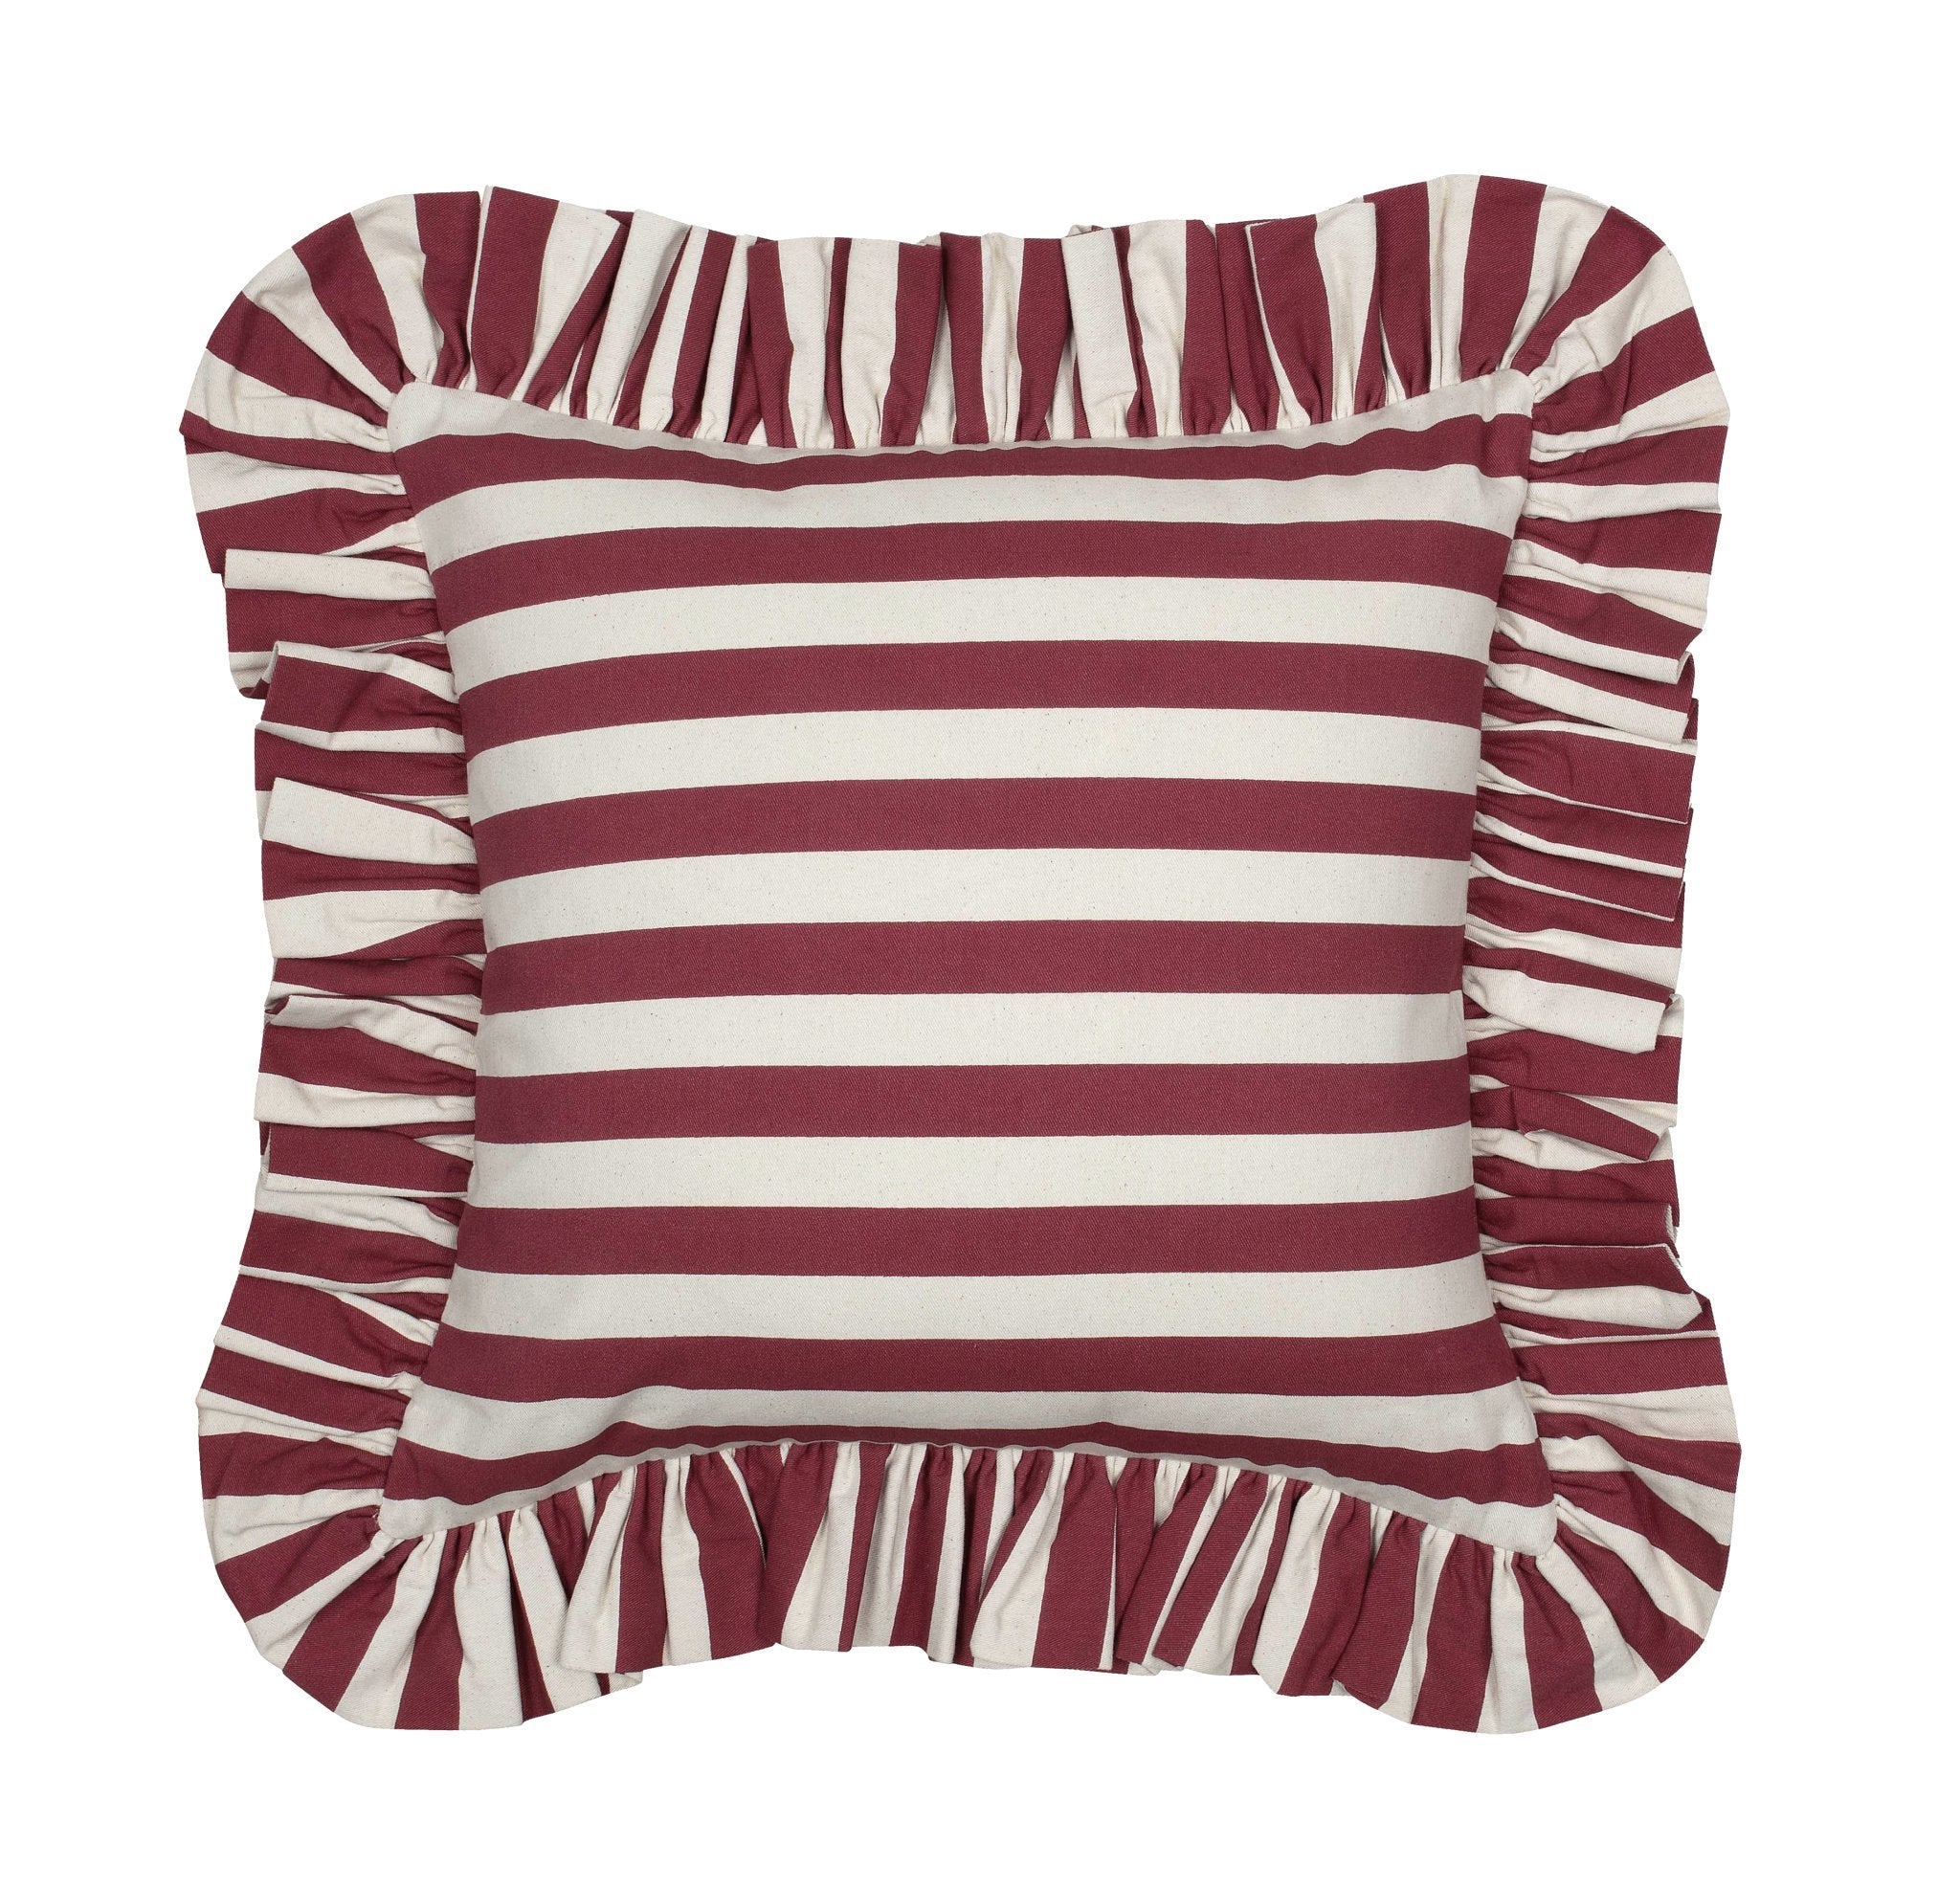 Tangier Red Stripe Frilly Cushion - Alice Palmer & Co